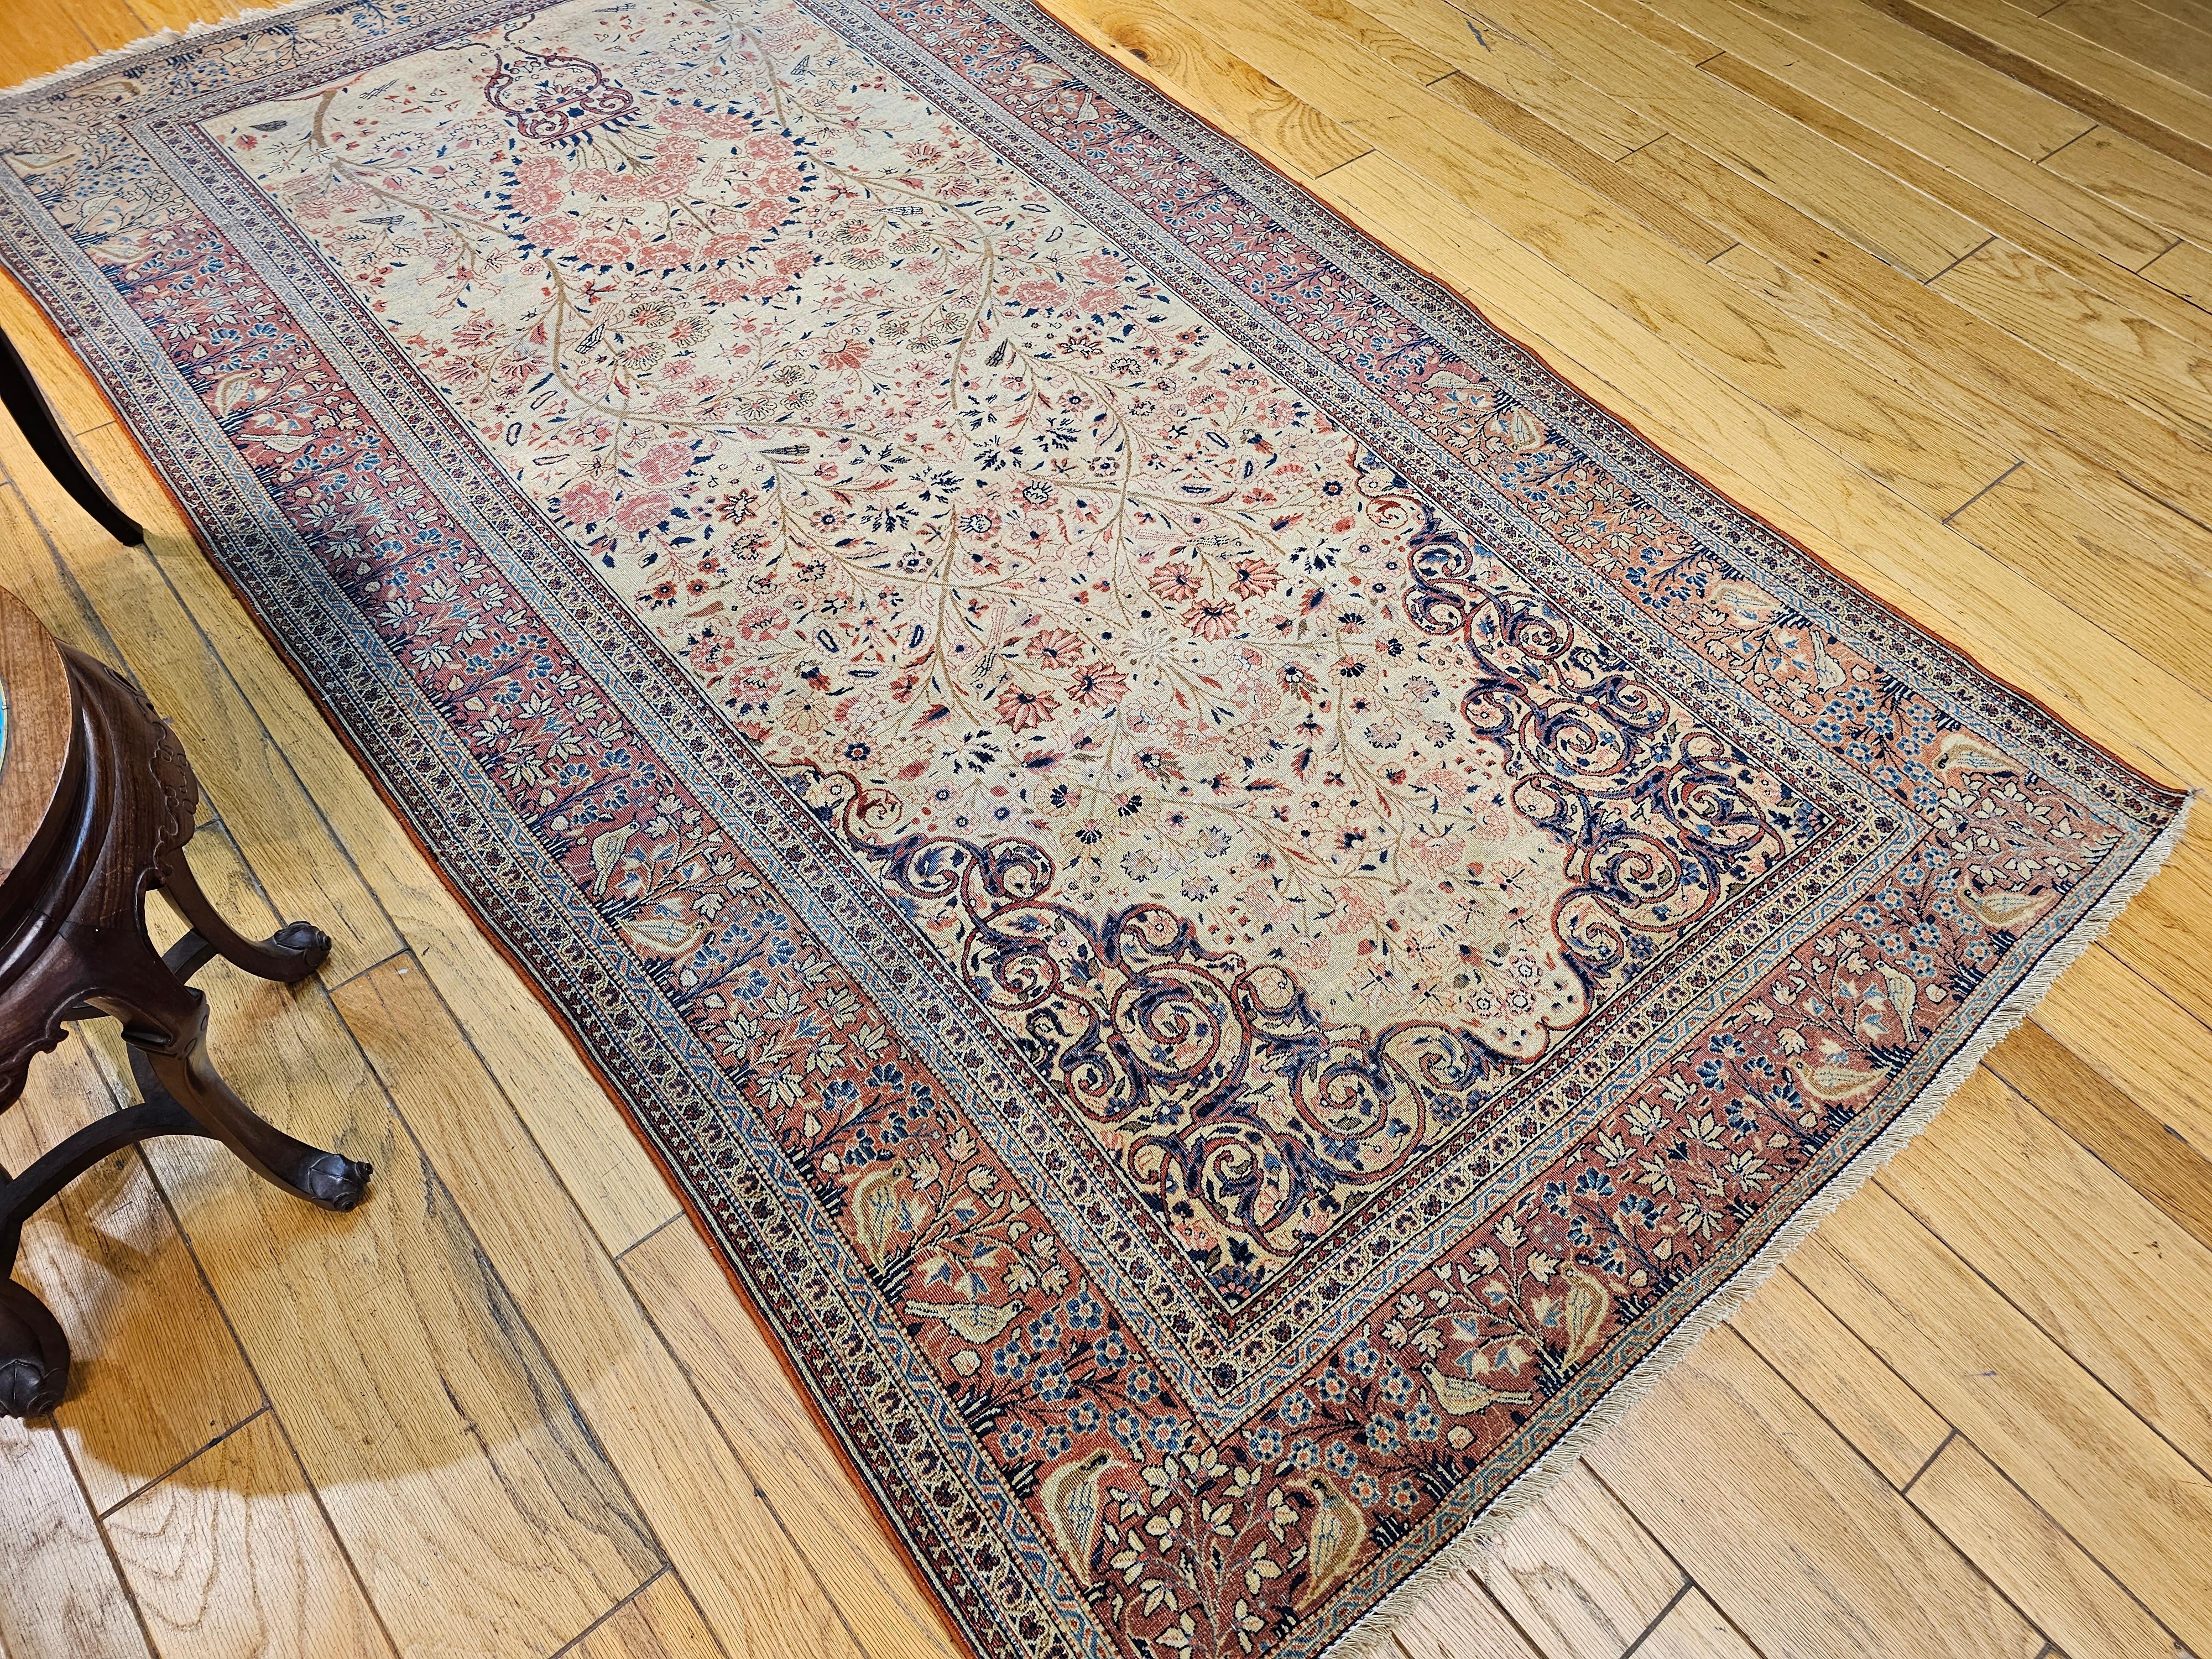 19th Century Persian Kashan Vase “Tree of Life” Rug in Ivory, Brick Red, Navy For Sale 9